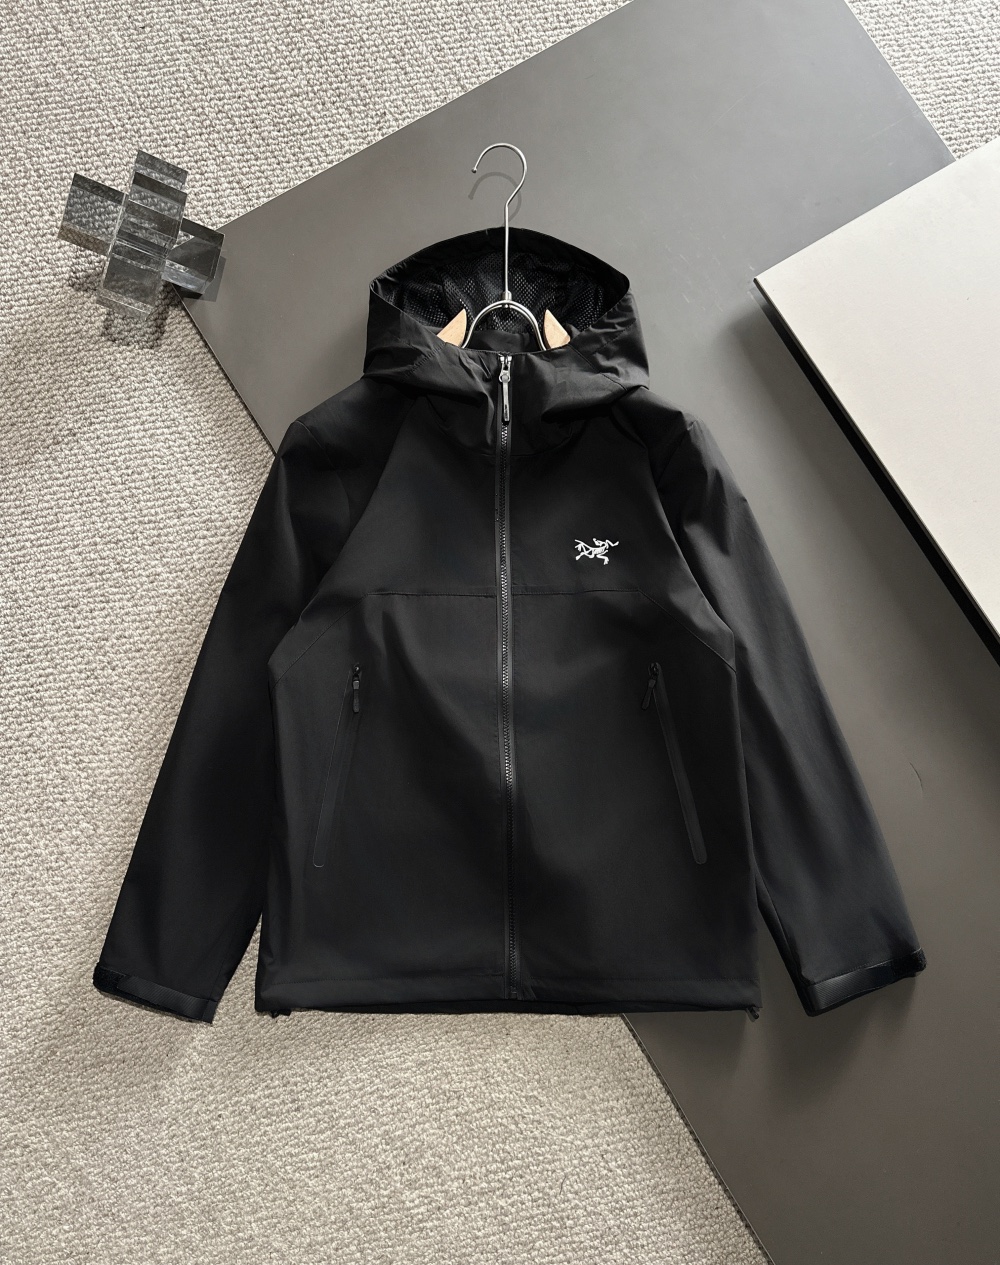 Arc’teryx Clothing Coats & Jackets Spring Collection Fashion Casual